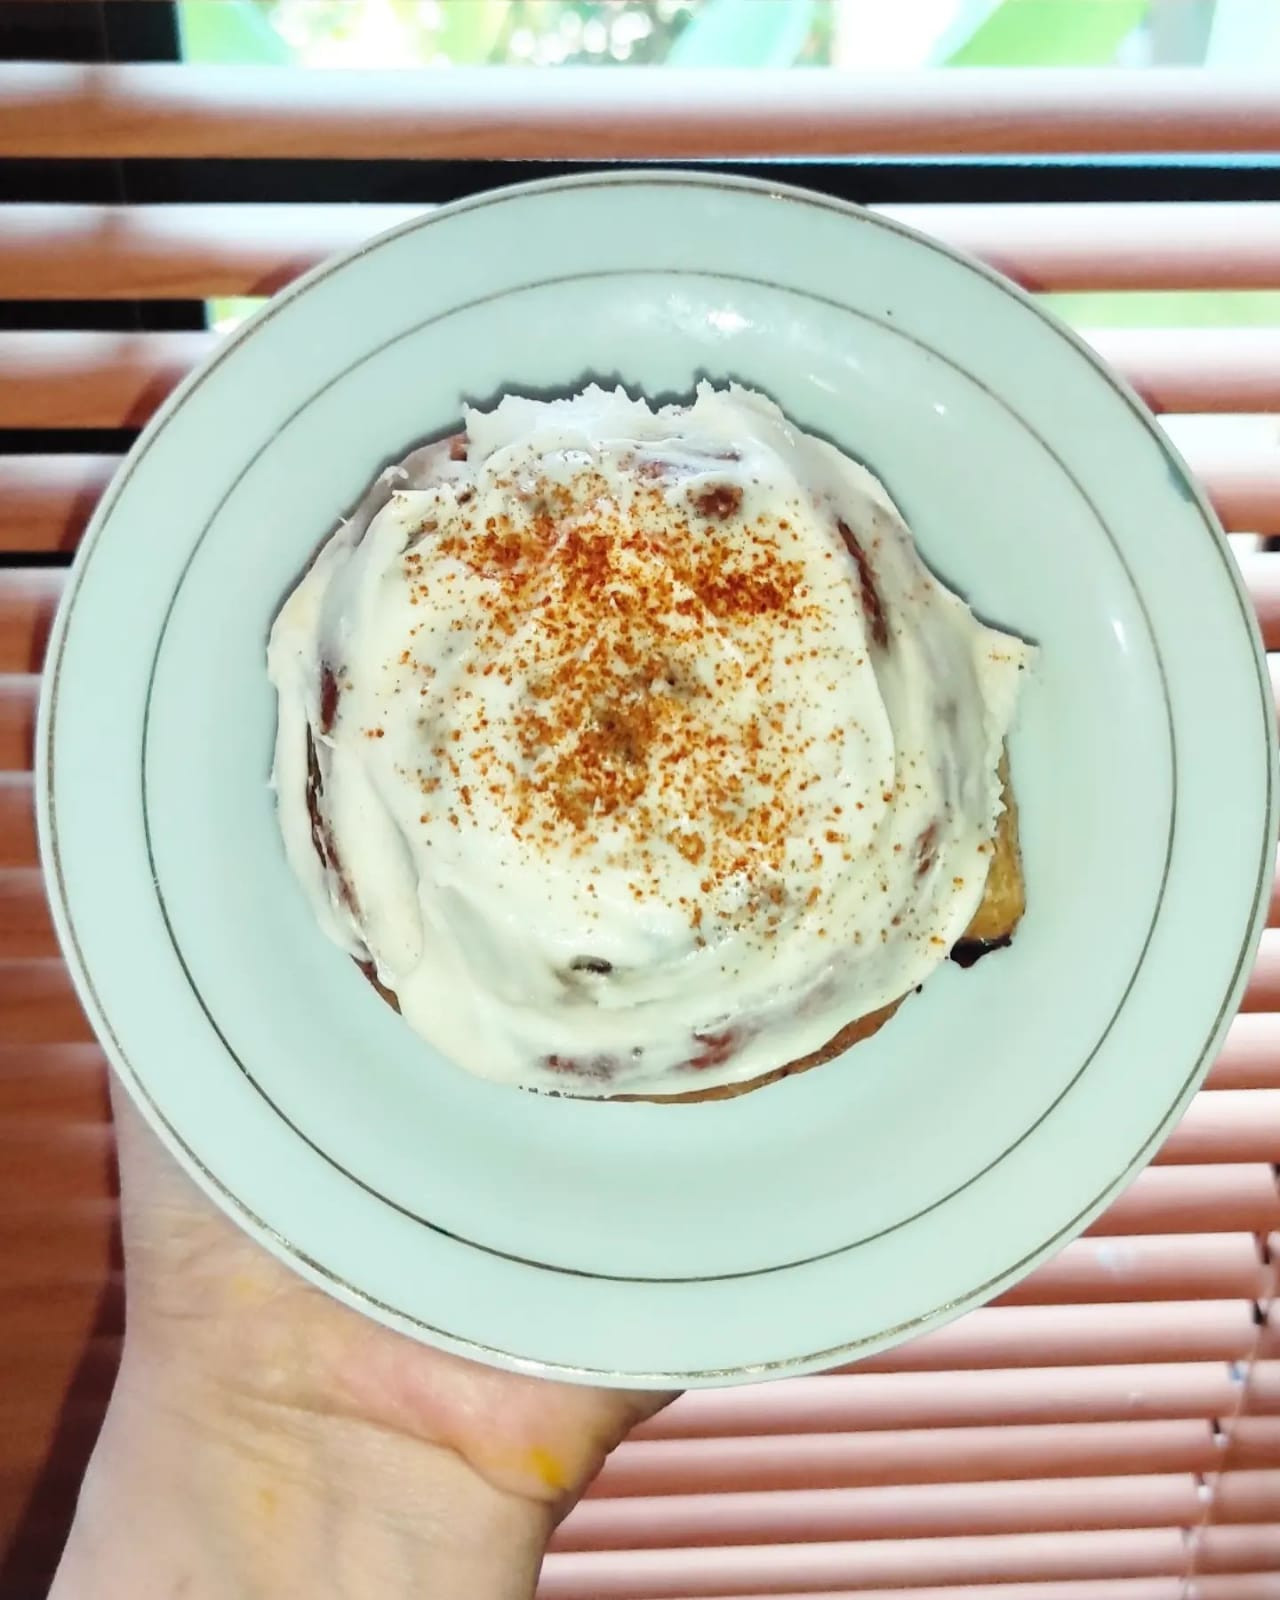 Cinnamon rolls with cream cheese frosting 4 pcs